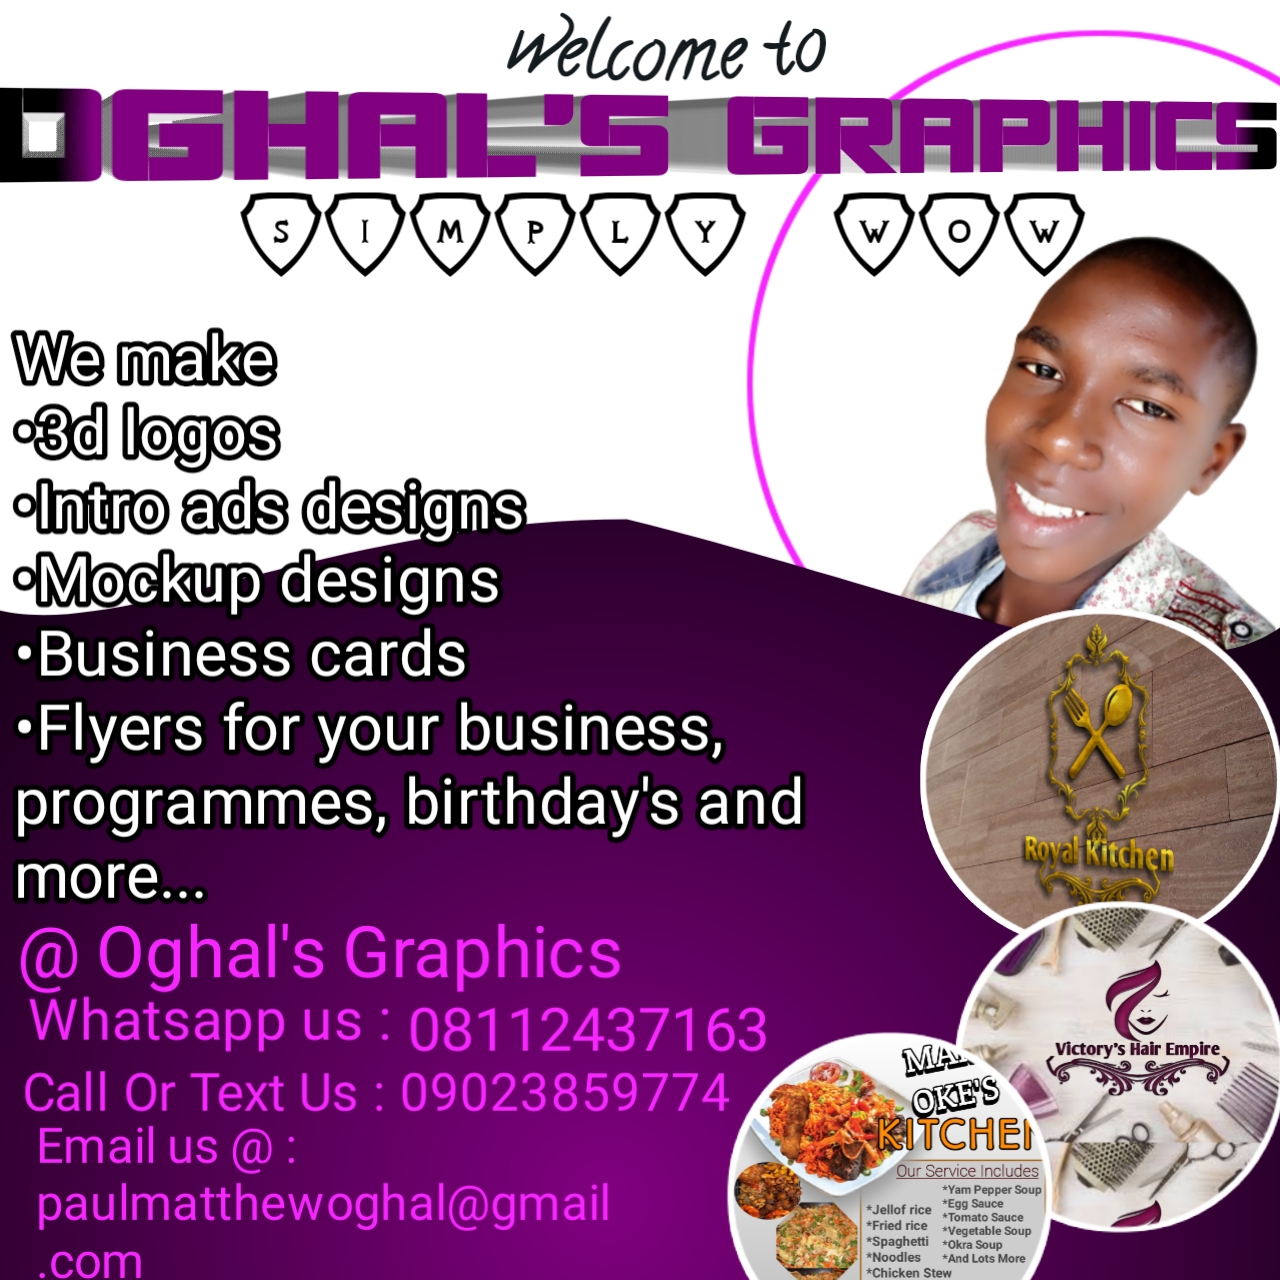 Oghal's Graphics